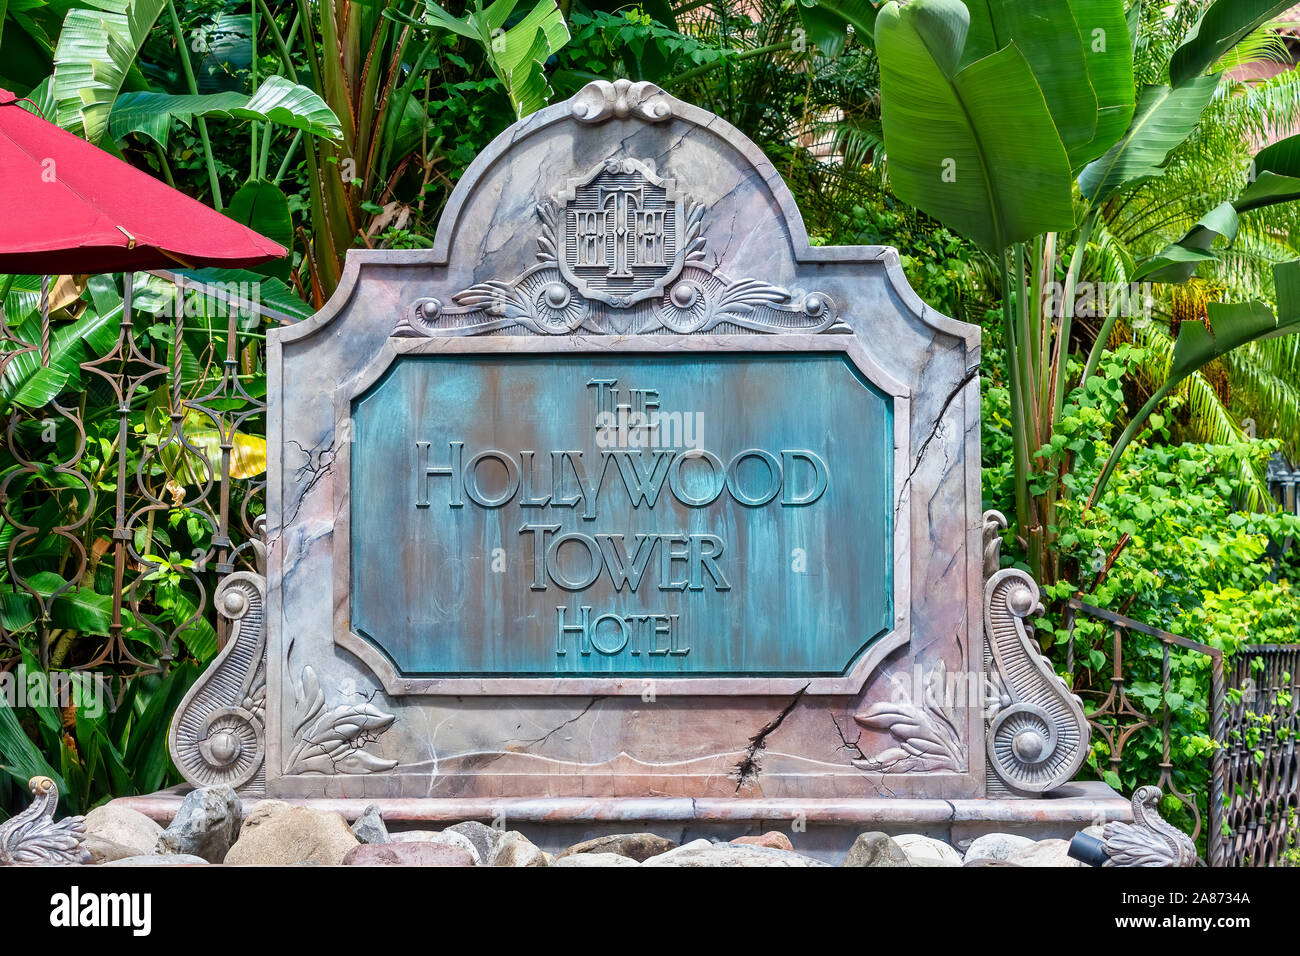 Hollywood Tower of Terror hotel ride sign at Disney Hollywood Studios Stock Photo